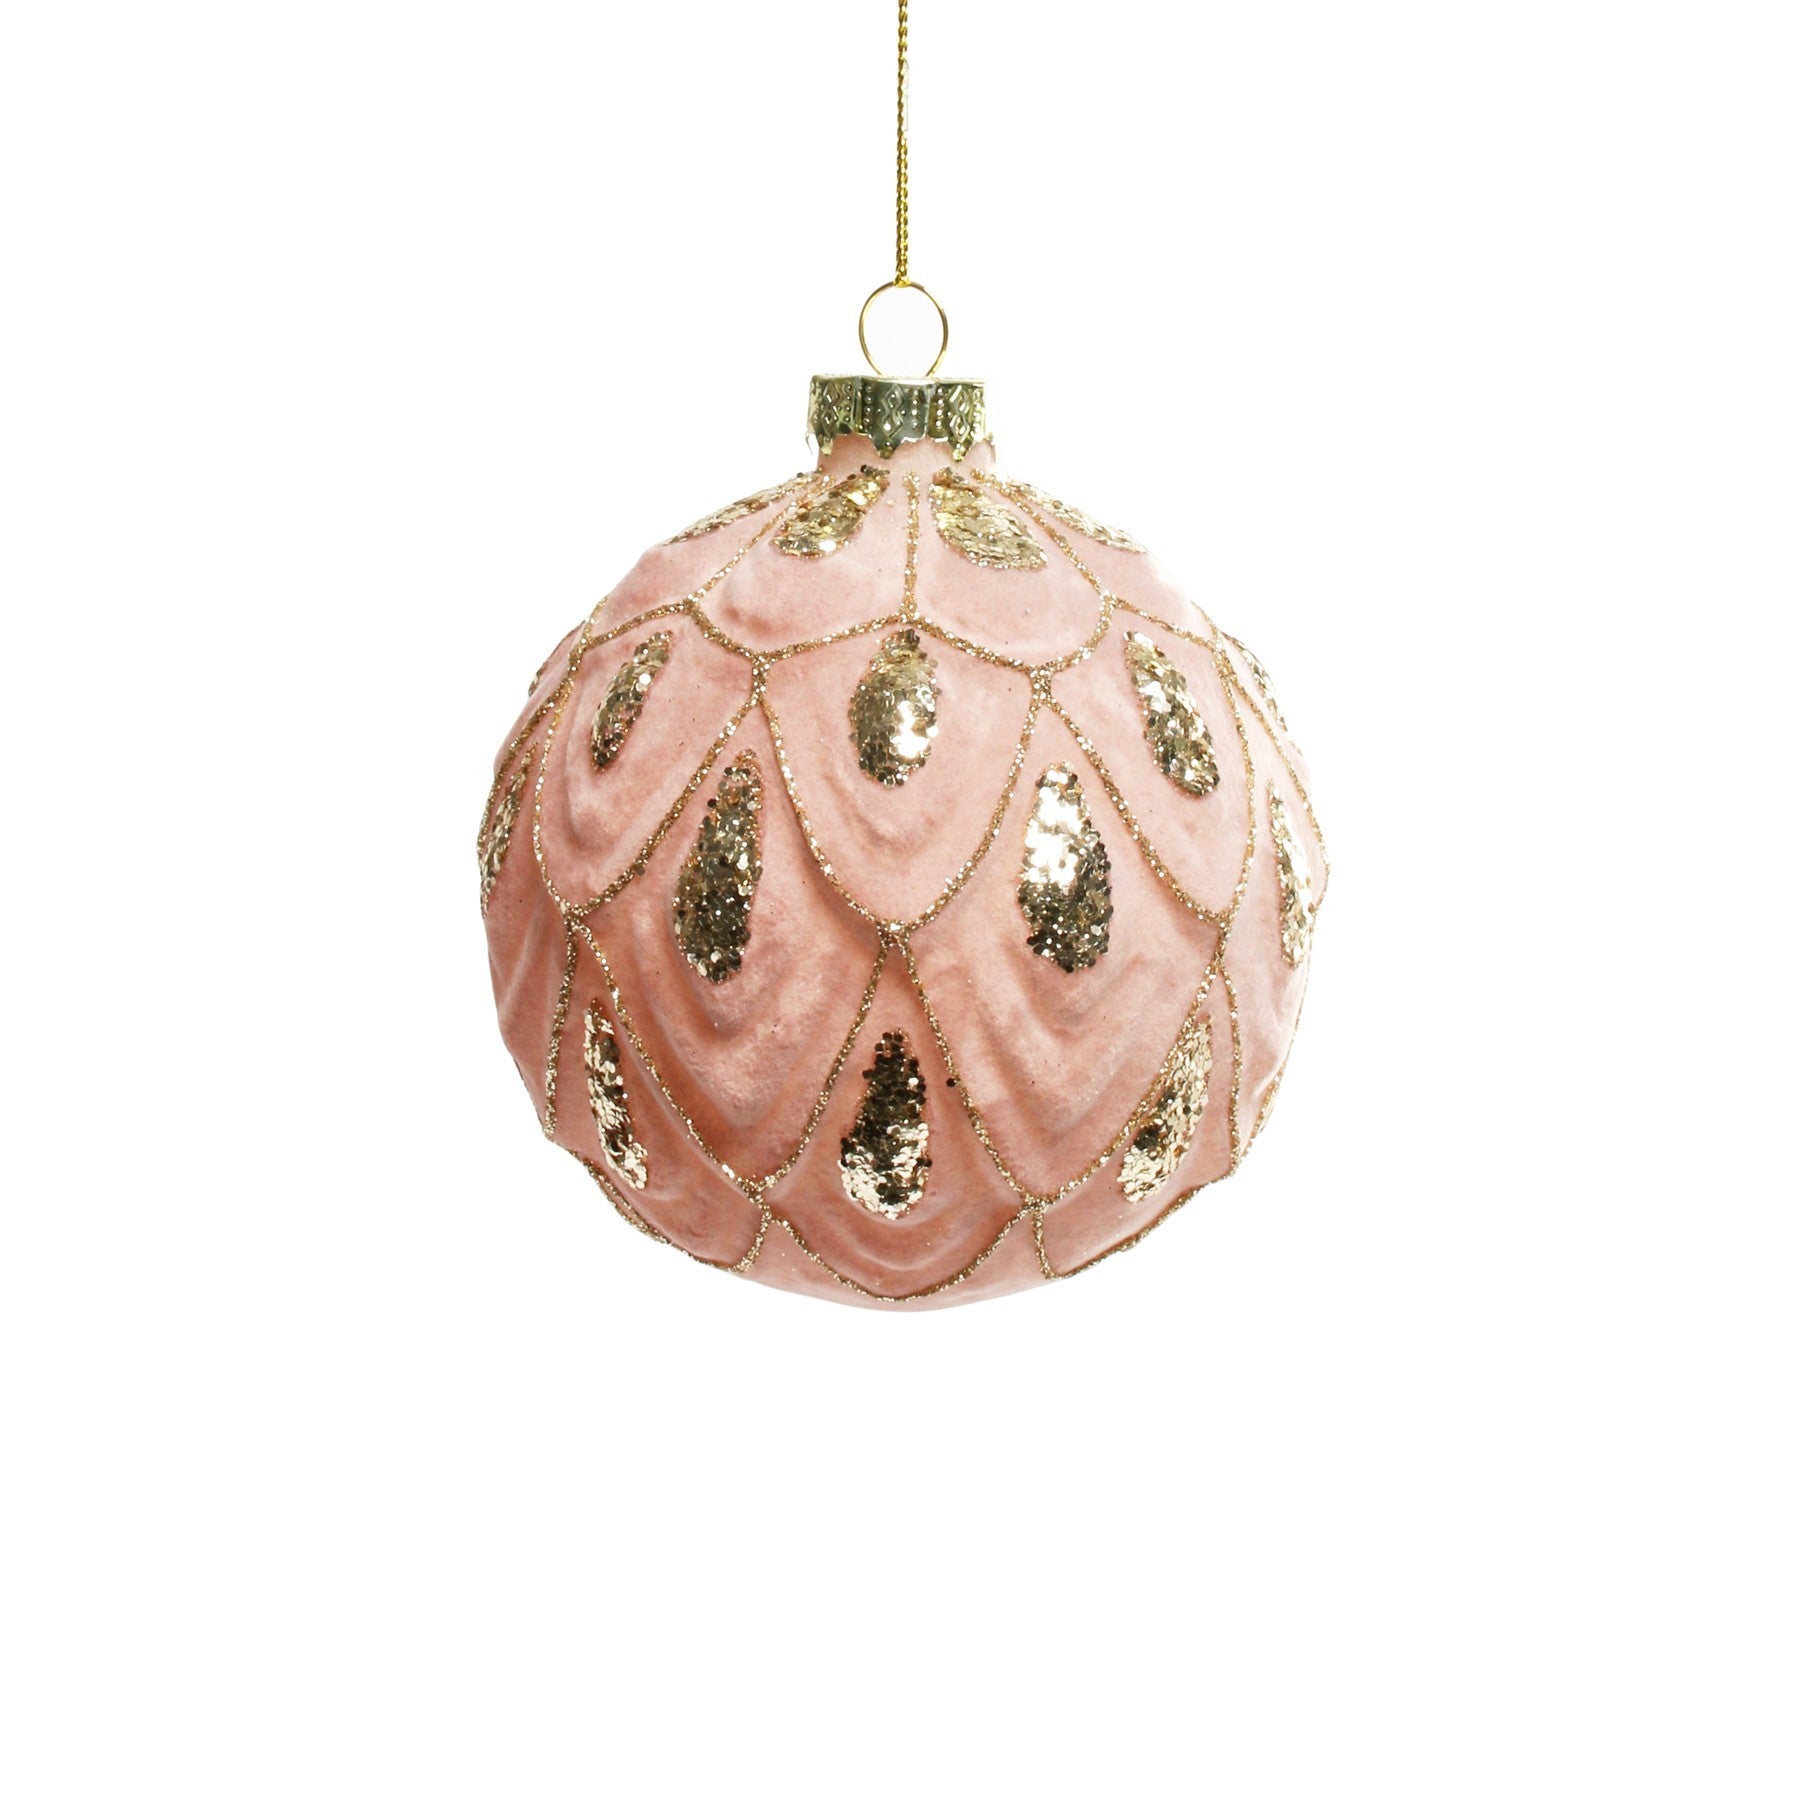 View Pink Ruffled Glass Bauble with Gold Droplets Dia10cm information